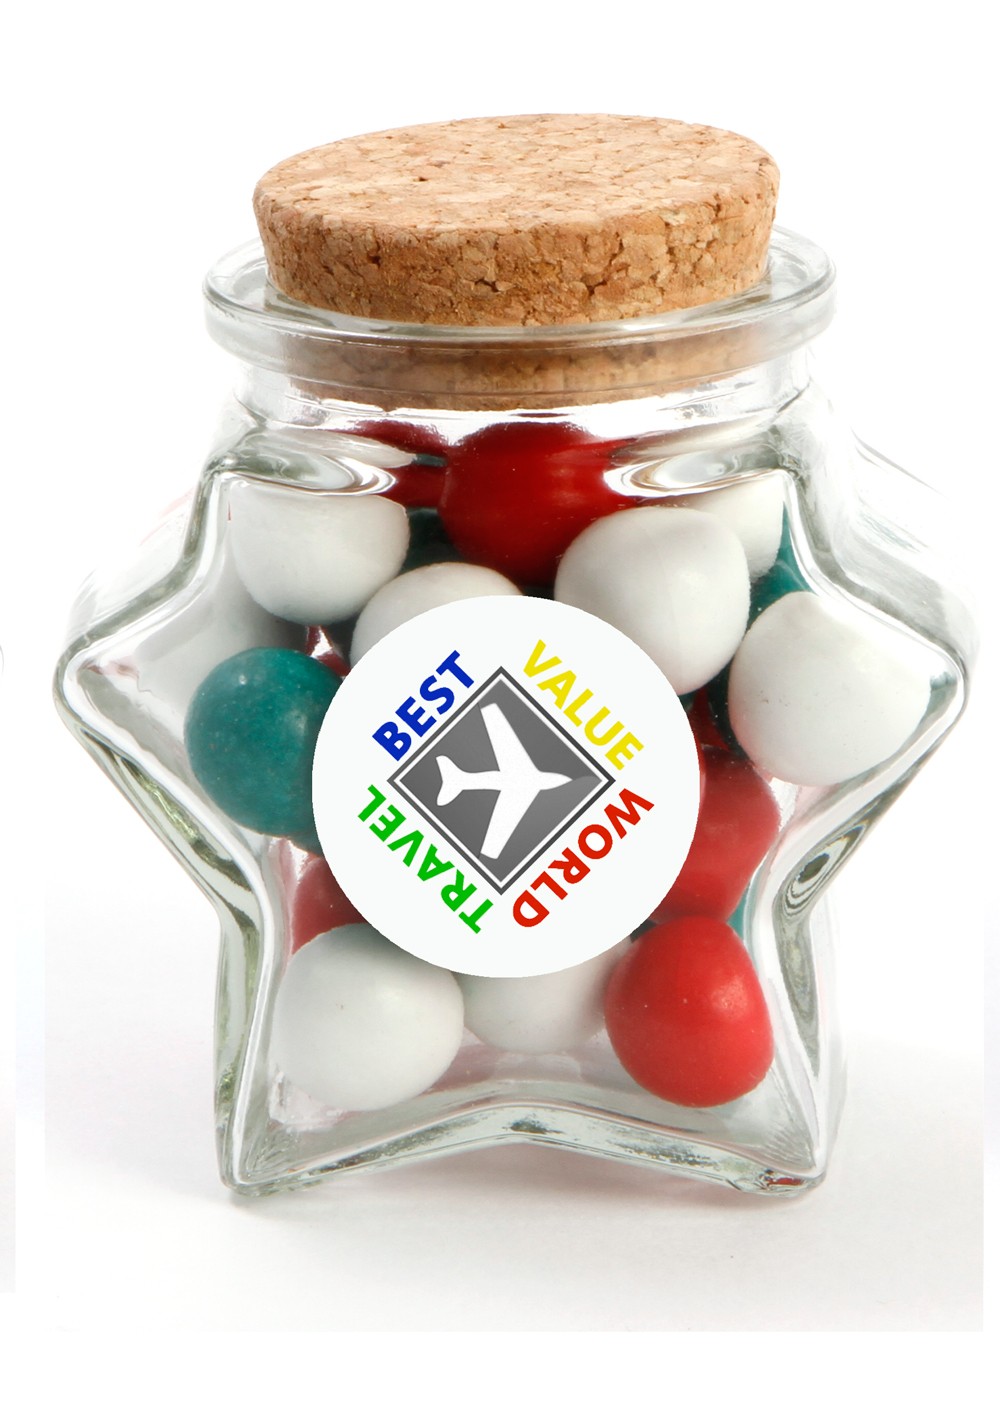 Star Jar with Sticker and Red,Green & White Chocolate balls